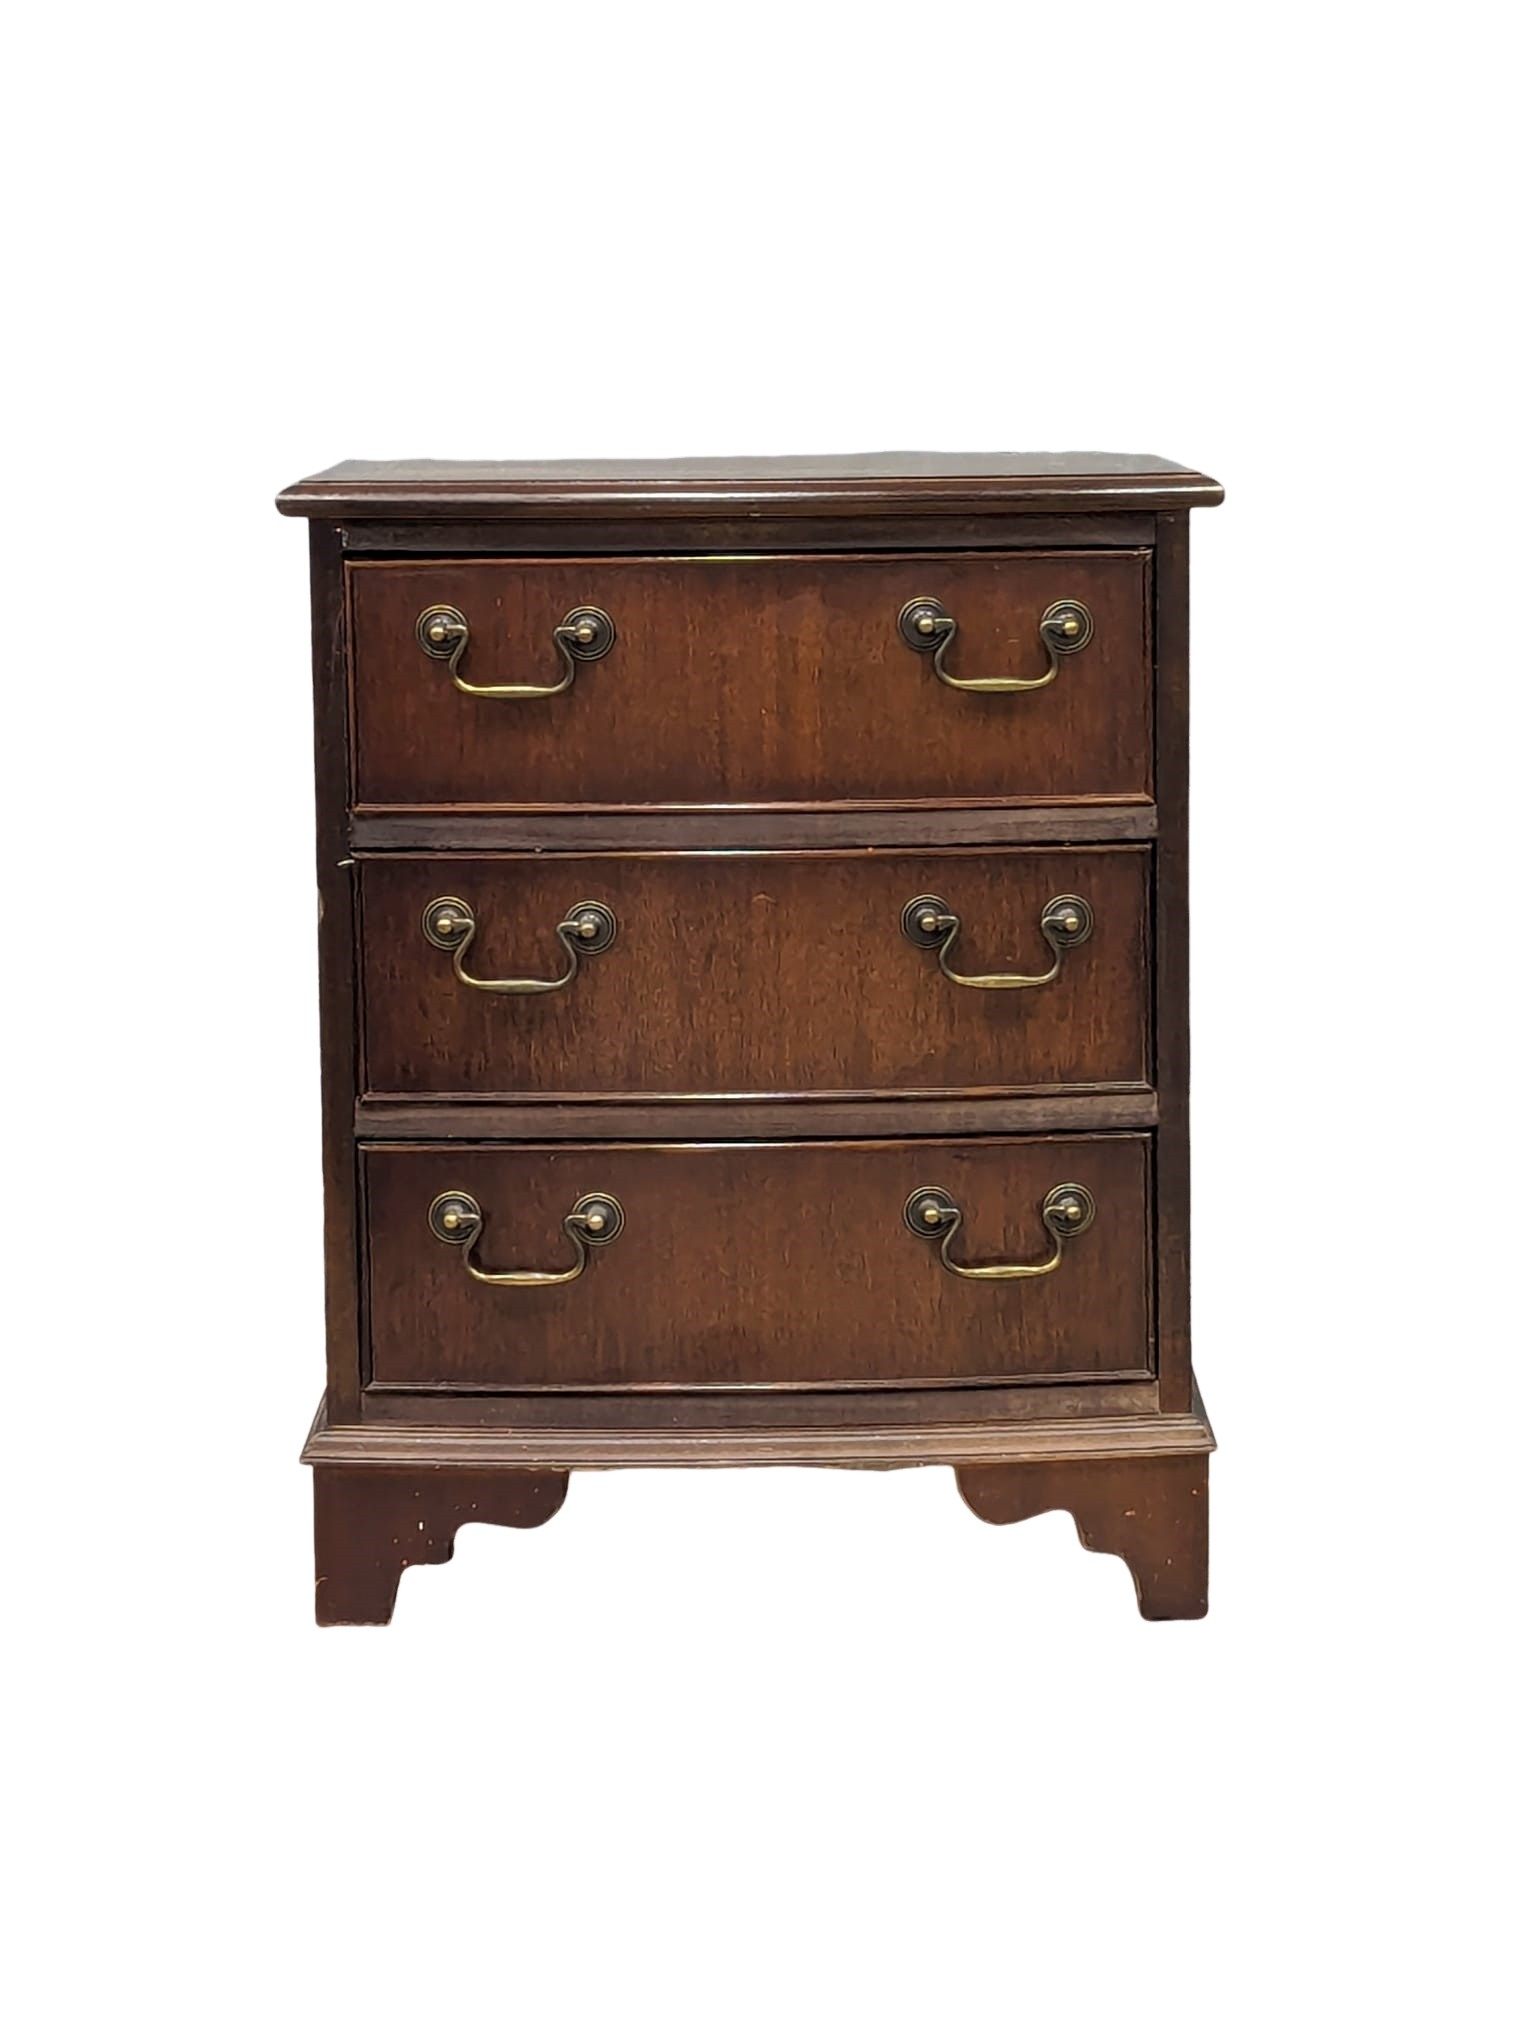 A small Georgian style mahogany bow front chest of drawers. 50.5x39x62cm